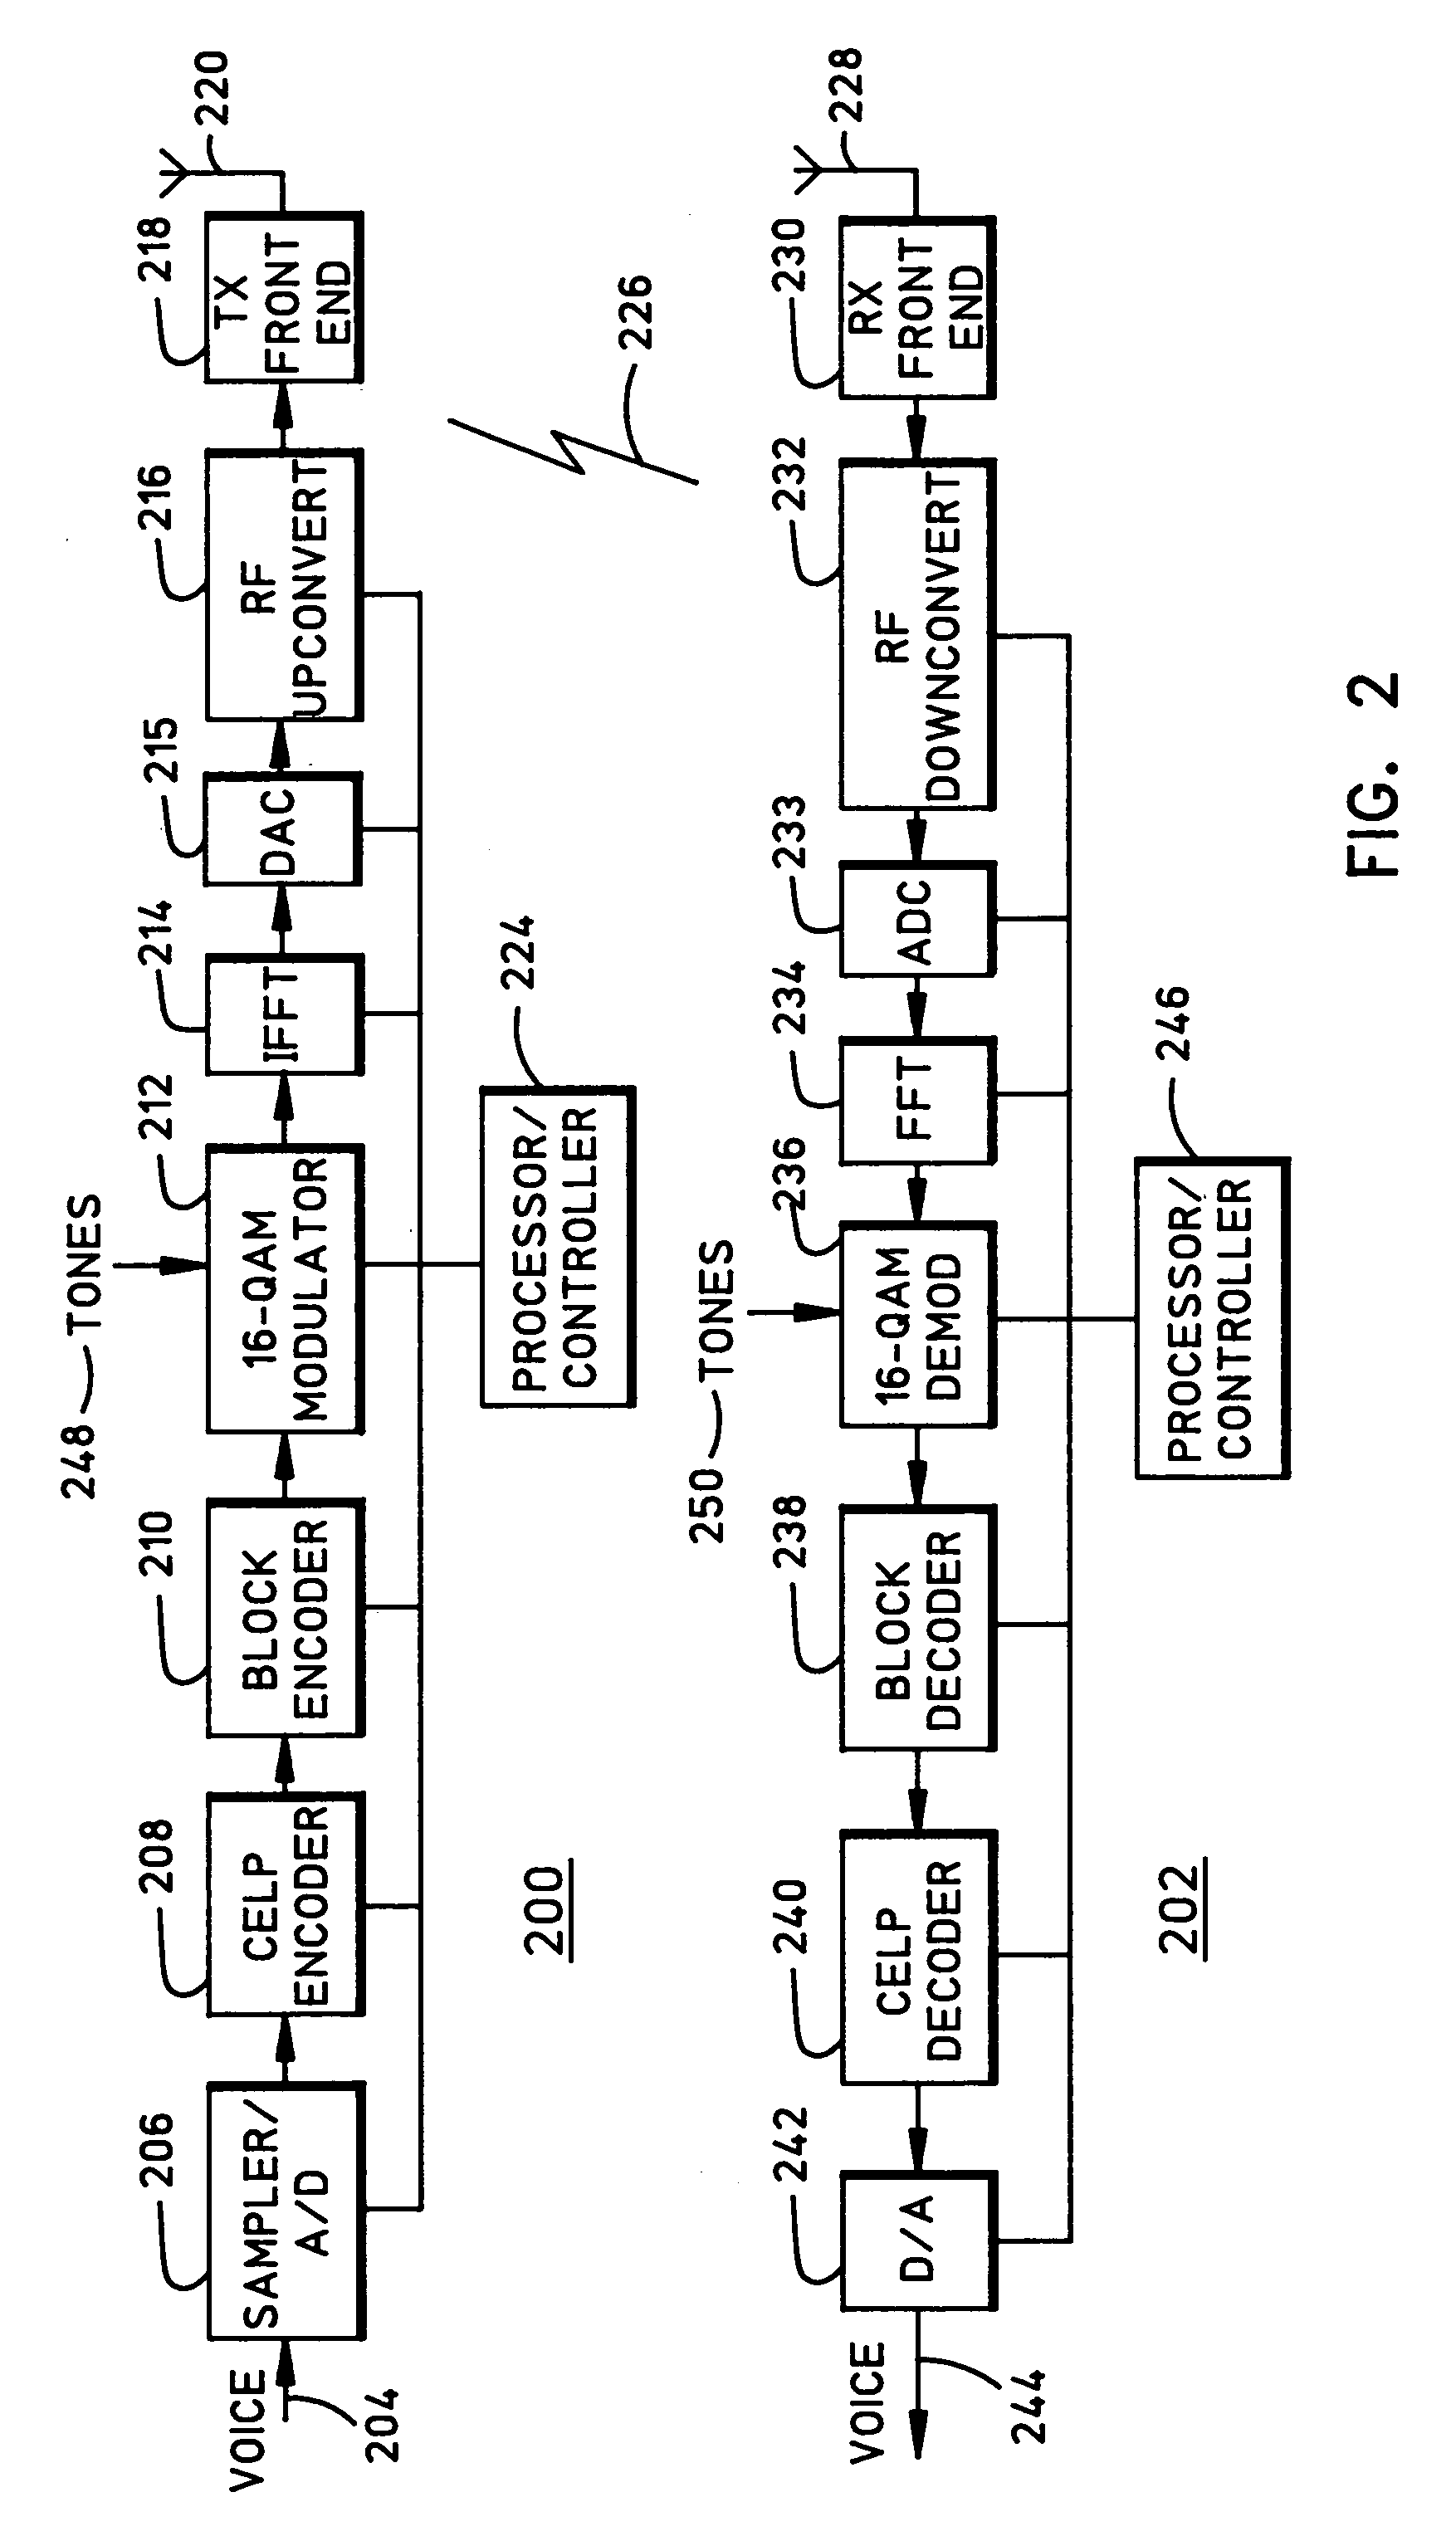 Methods and apparatus for use in communicating voice and high speed data in a wireless communication system